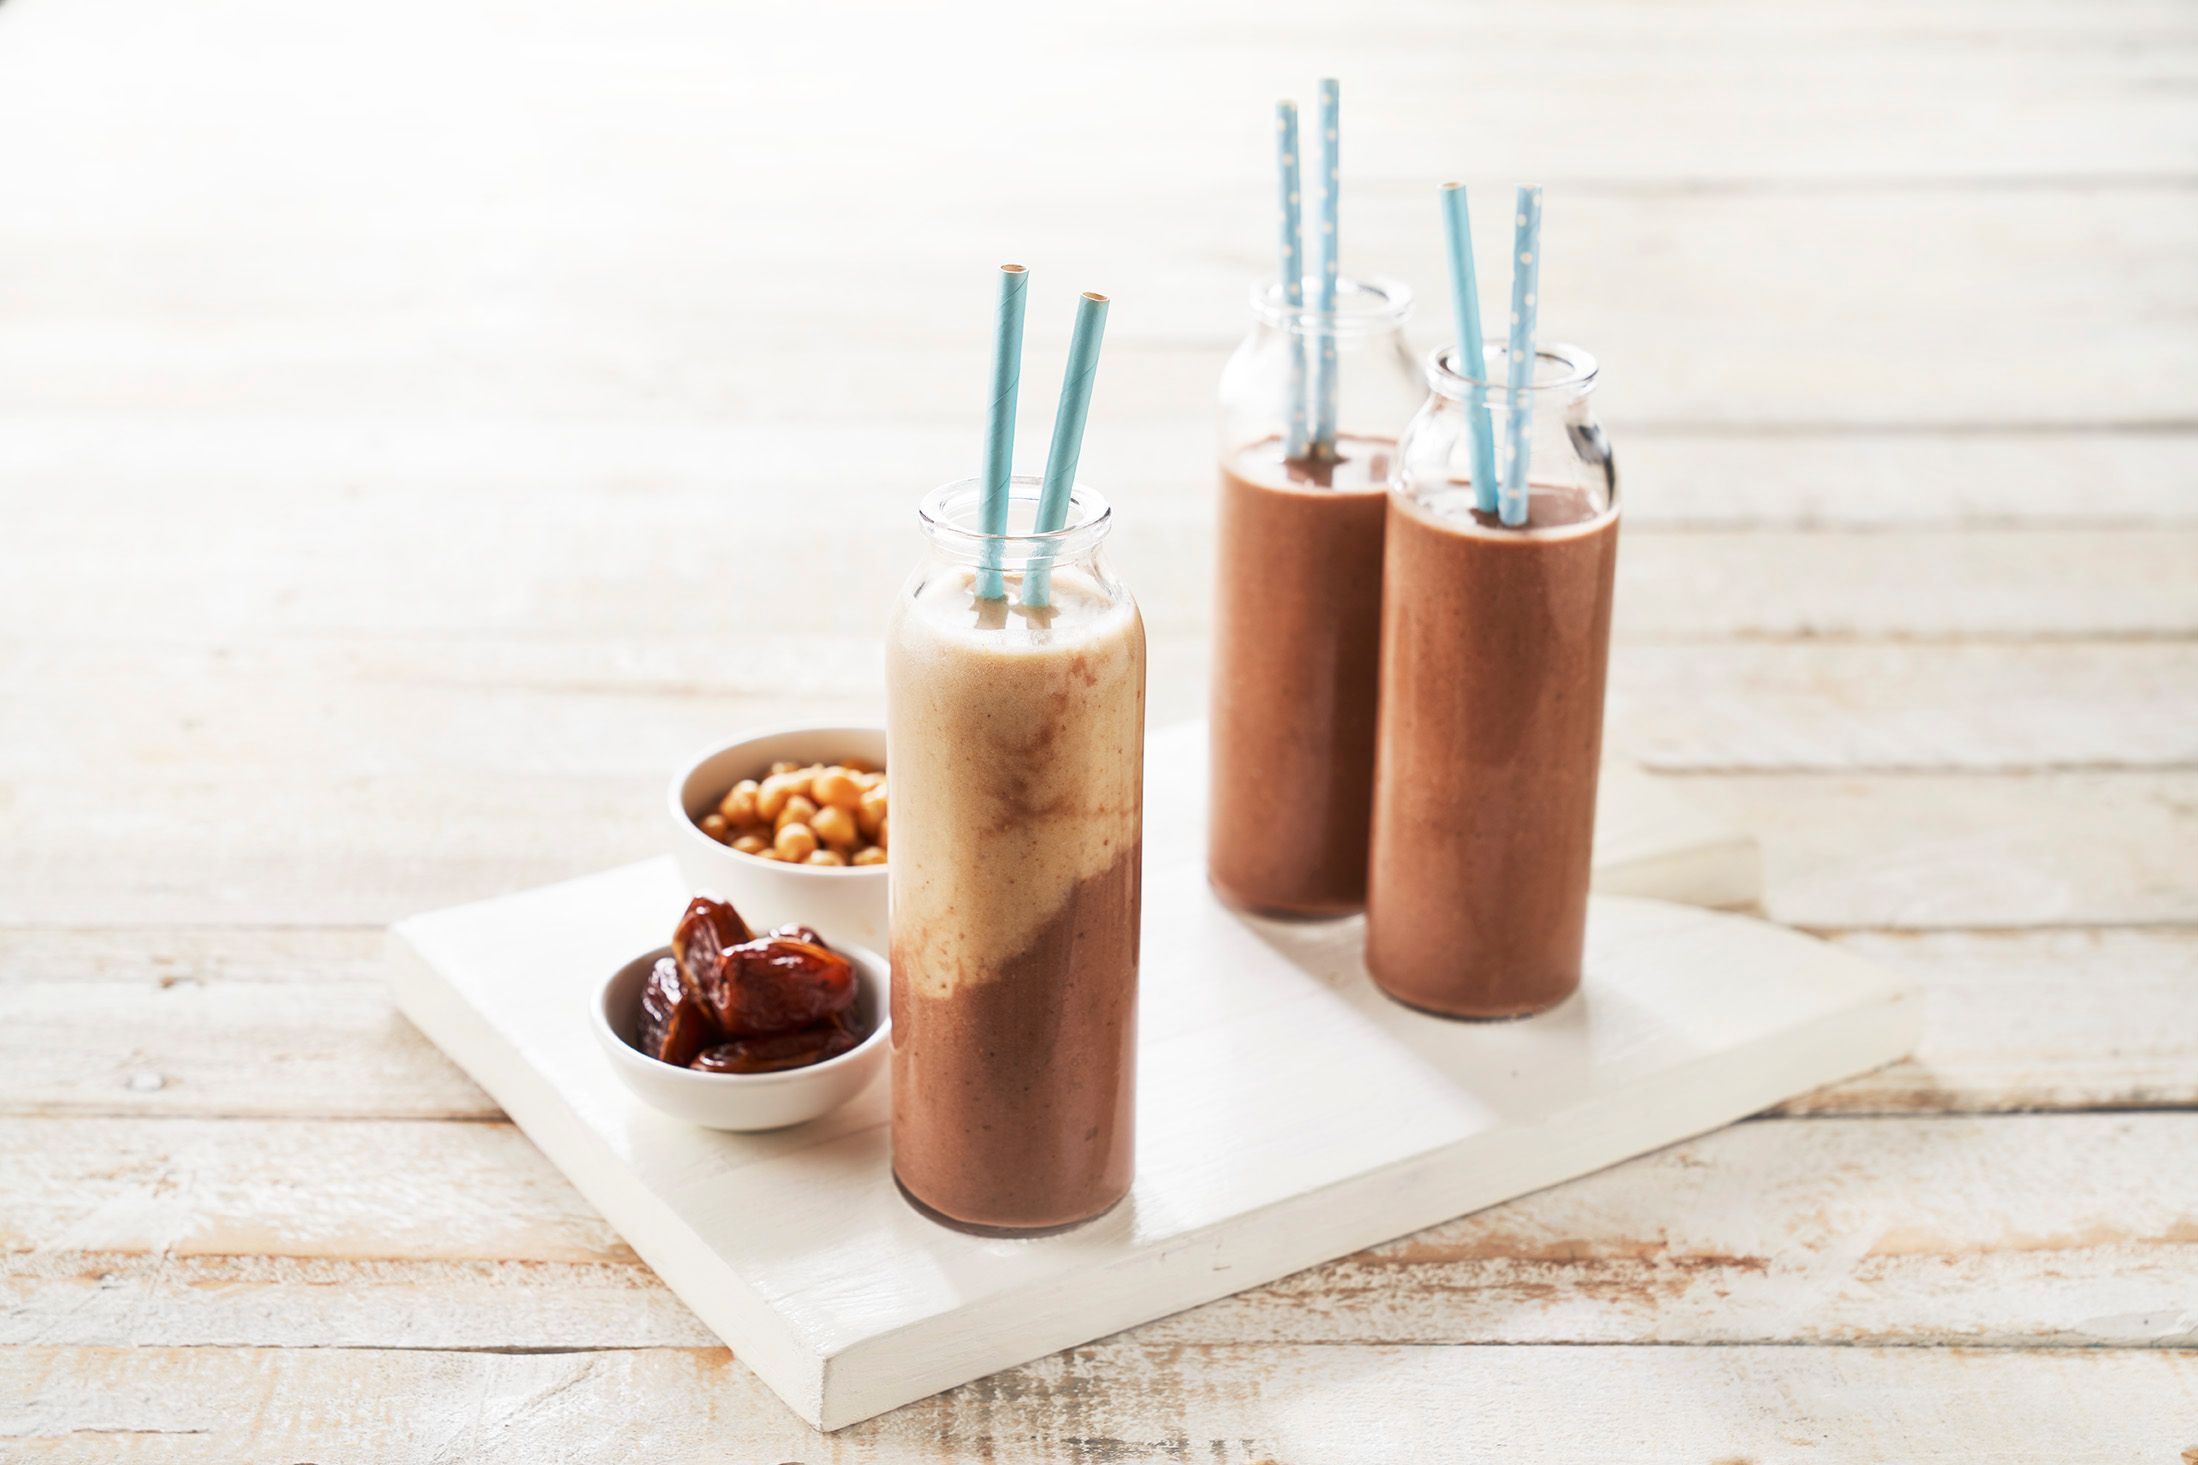 Three tall glass jars containing a creamy chocolate coloured liquid. Each glass contains two light blue paper straws. Small ramekins sit next to the glasses, one contains dates and the other contains chickpeas.